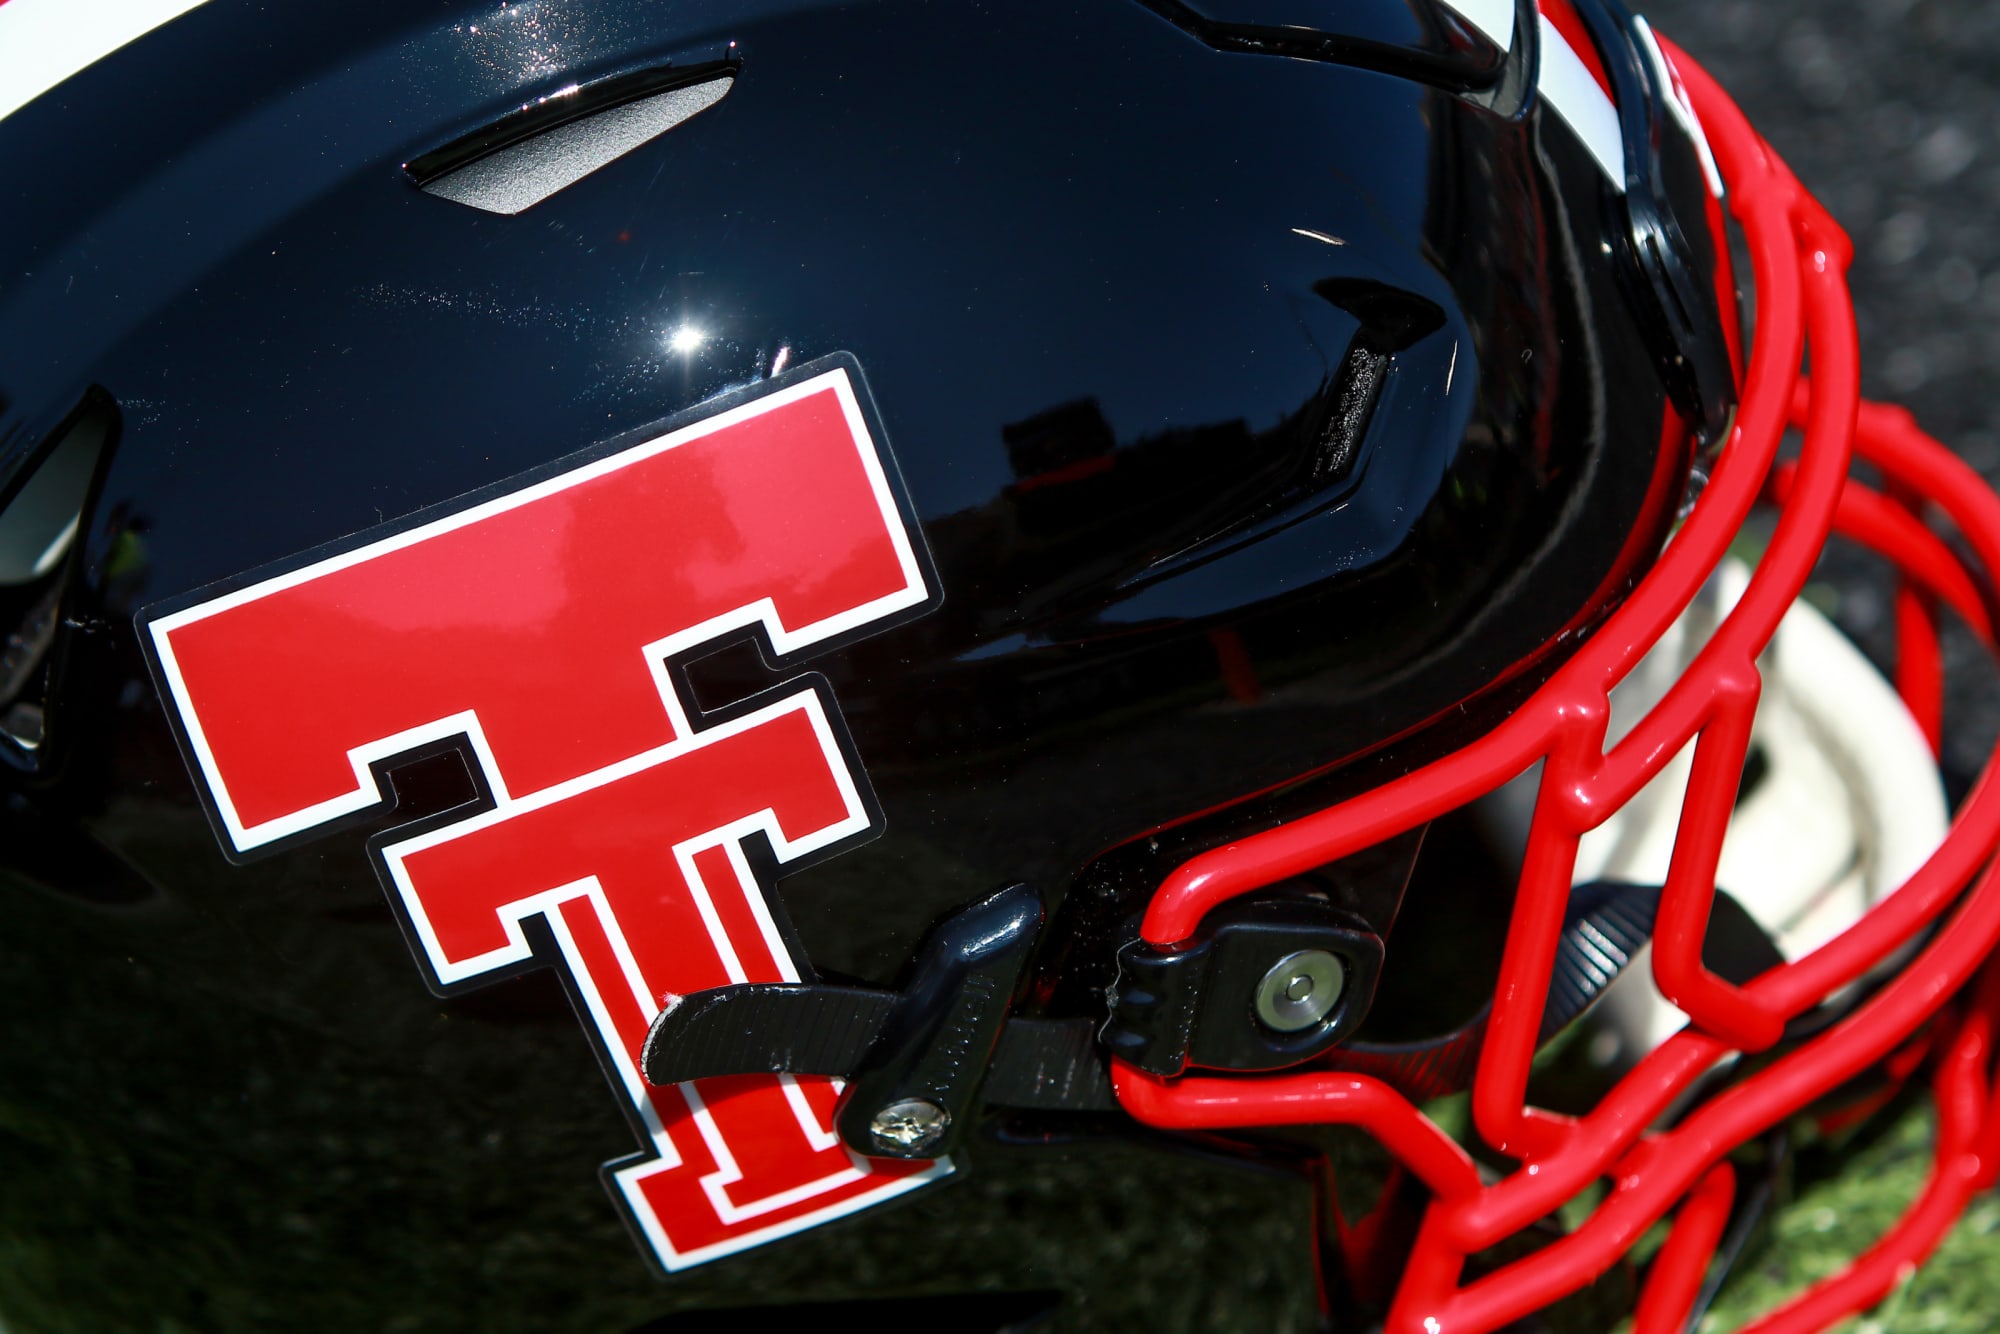 Texas Tech football: Takeaways from the 2022 schedule